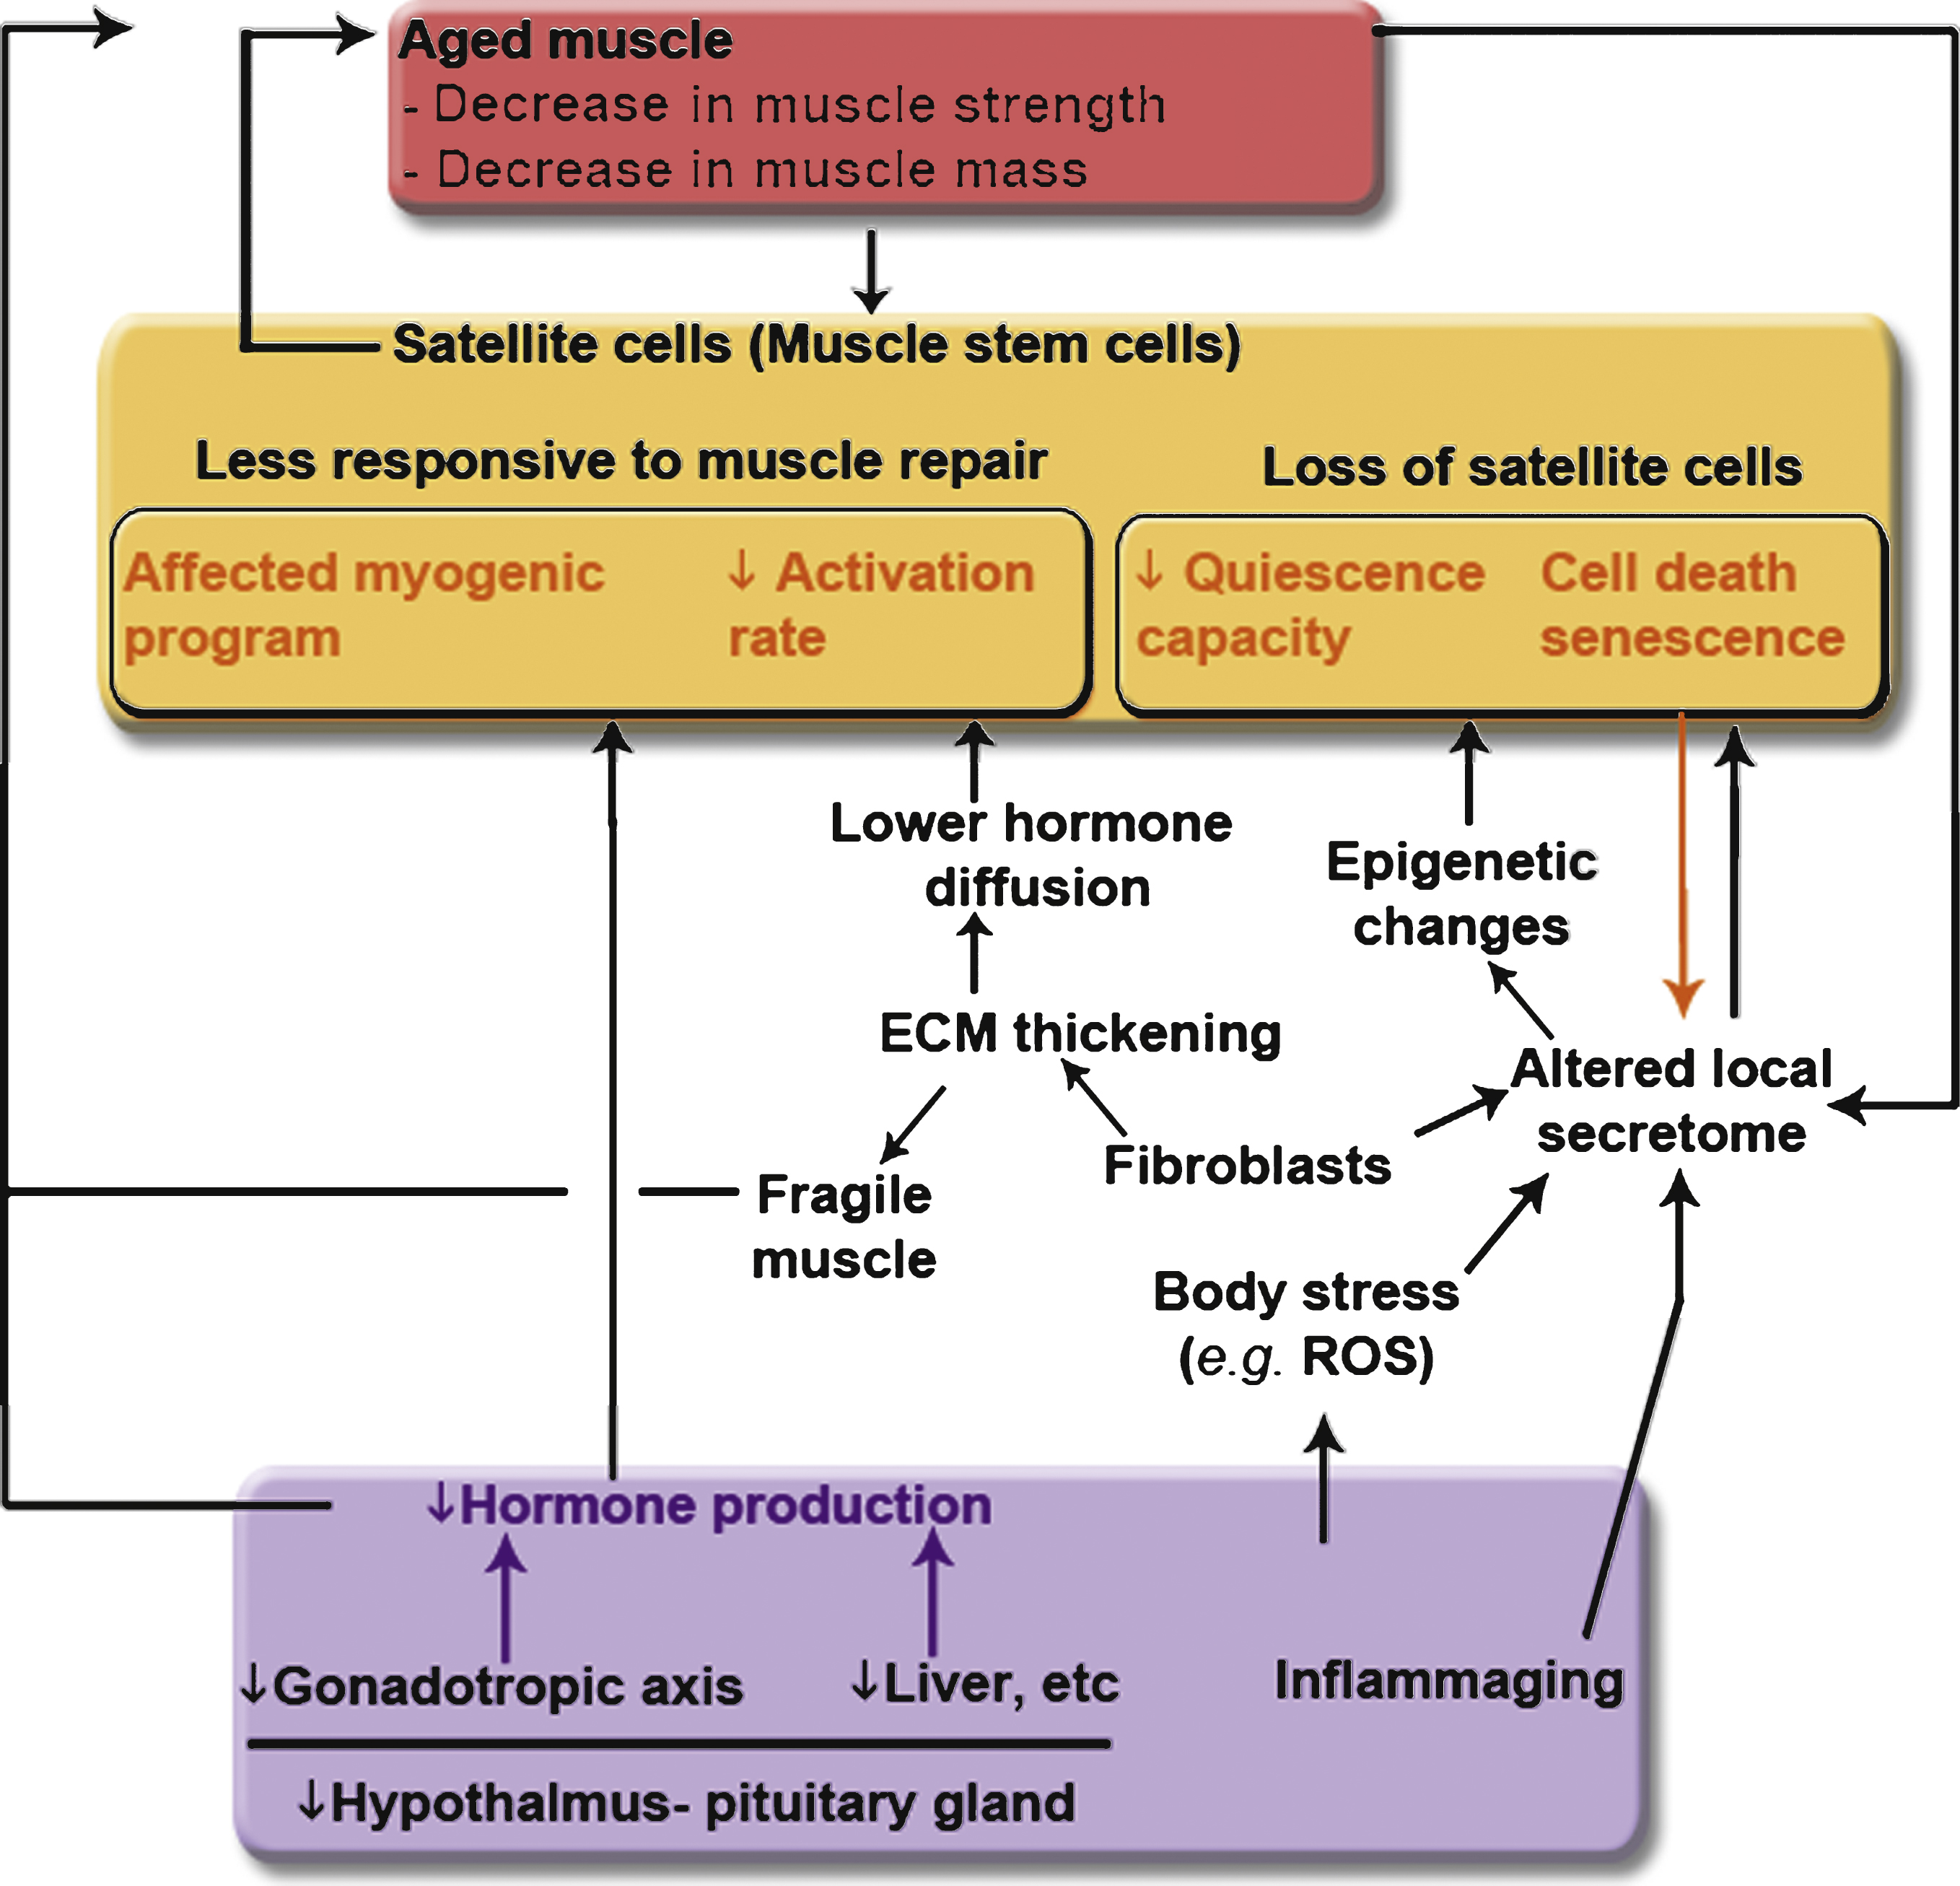 Links between whole-body composition changes, the decline of muscle size and function, and the loss of muscle stem cells and their functions with aging. Modifications with age of the endocrine systems (hypothalamus-pituitary system, gonad glands, liver, etc.) affect the quantity and the content of circulating serum hormones and impact muscle mass maintenance (atrophy of the muscle fibers and decrease in the regenerative capacity of the muscle). Increased inflammation with age - also called inflammaging - affects whole body stress level and is accompanied by modification in secreted cytokine content. Increased oxidative stress of the muscle leads to DNA damage and epigenetic changes, and consequently affects the regenerative capacity of the muscle. The composition of the microenvironment of the satellite cells is affected with age, through the presence of aged fibroblasts, of senescent cells, and aged myofibers. These local changes contribute to the fragility of the myofibers and to a decrease in the regenerative potency.